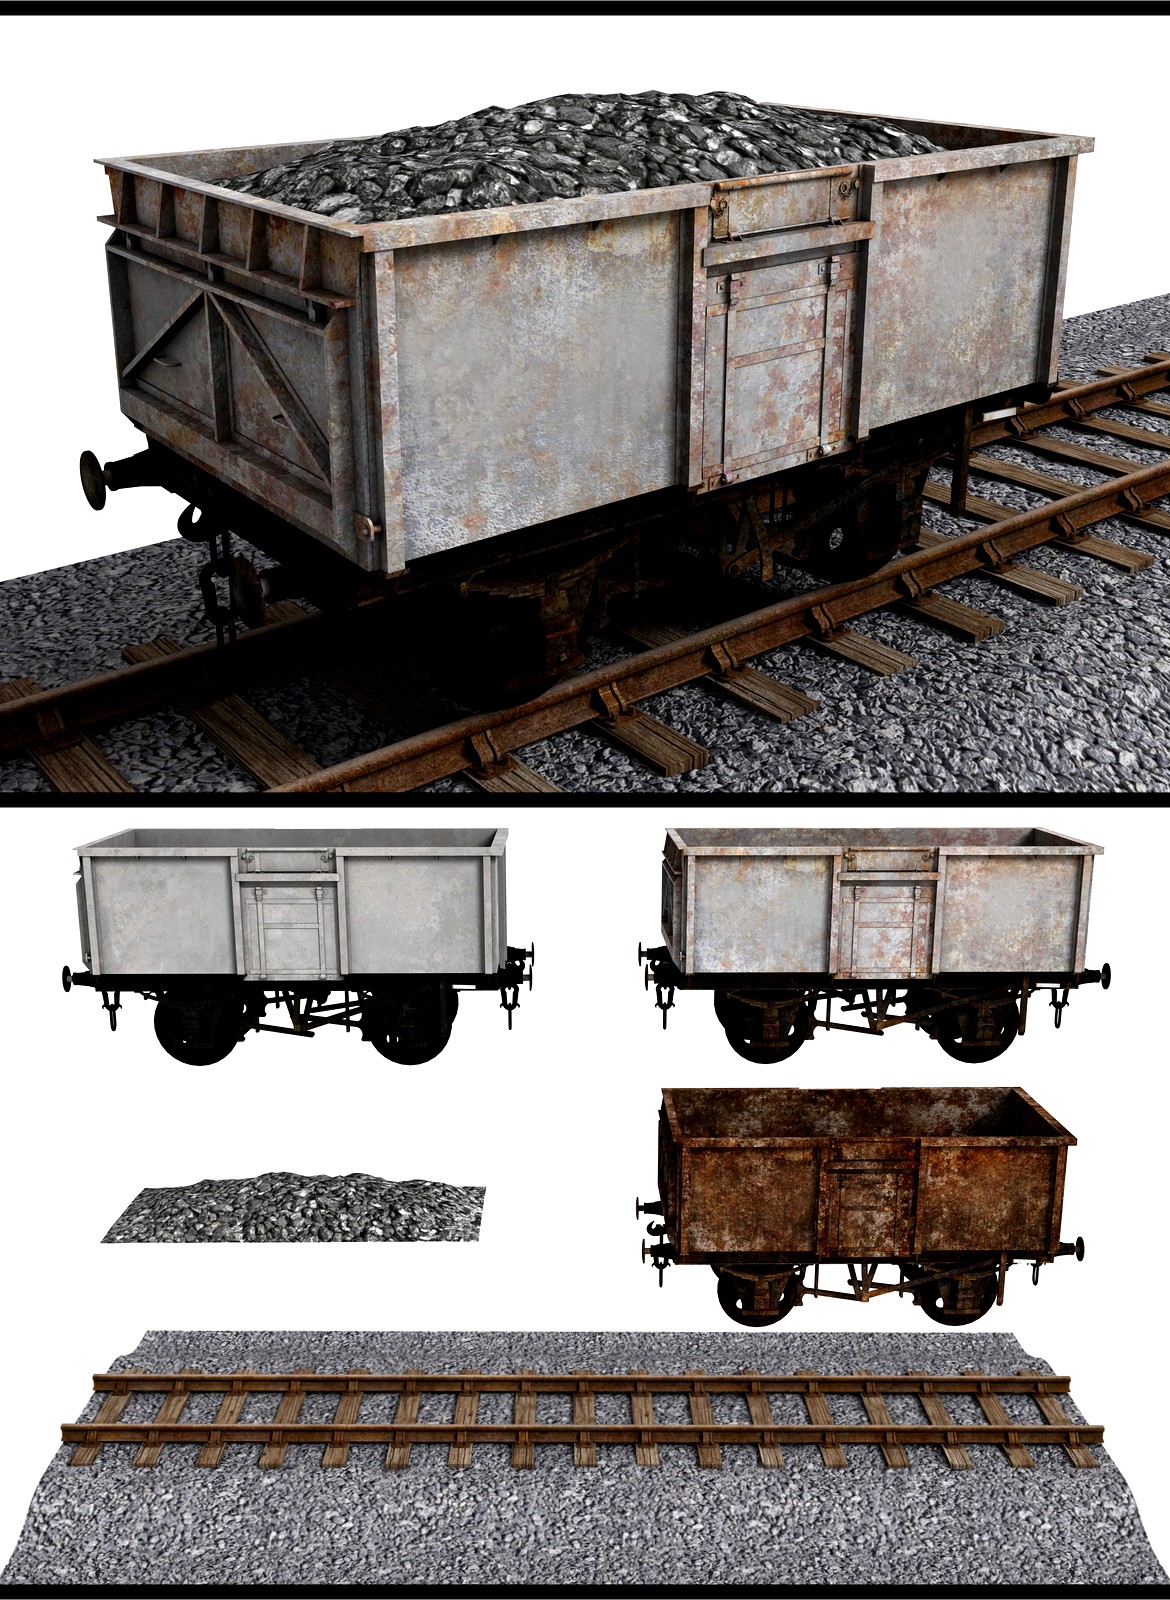 16 Ton Mineral Wagon - Extended License